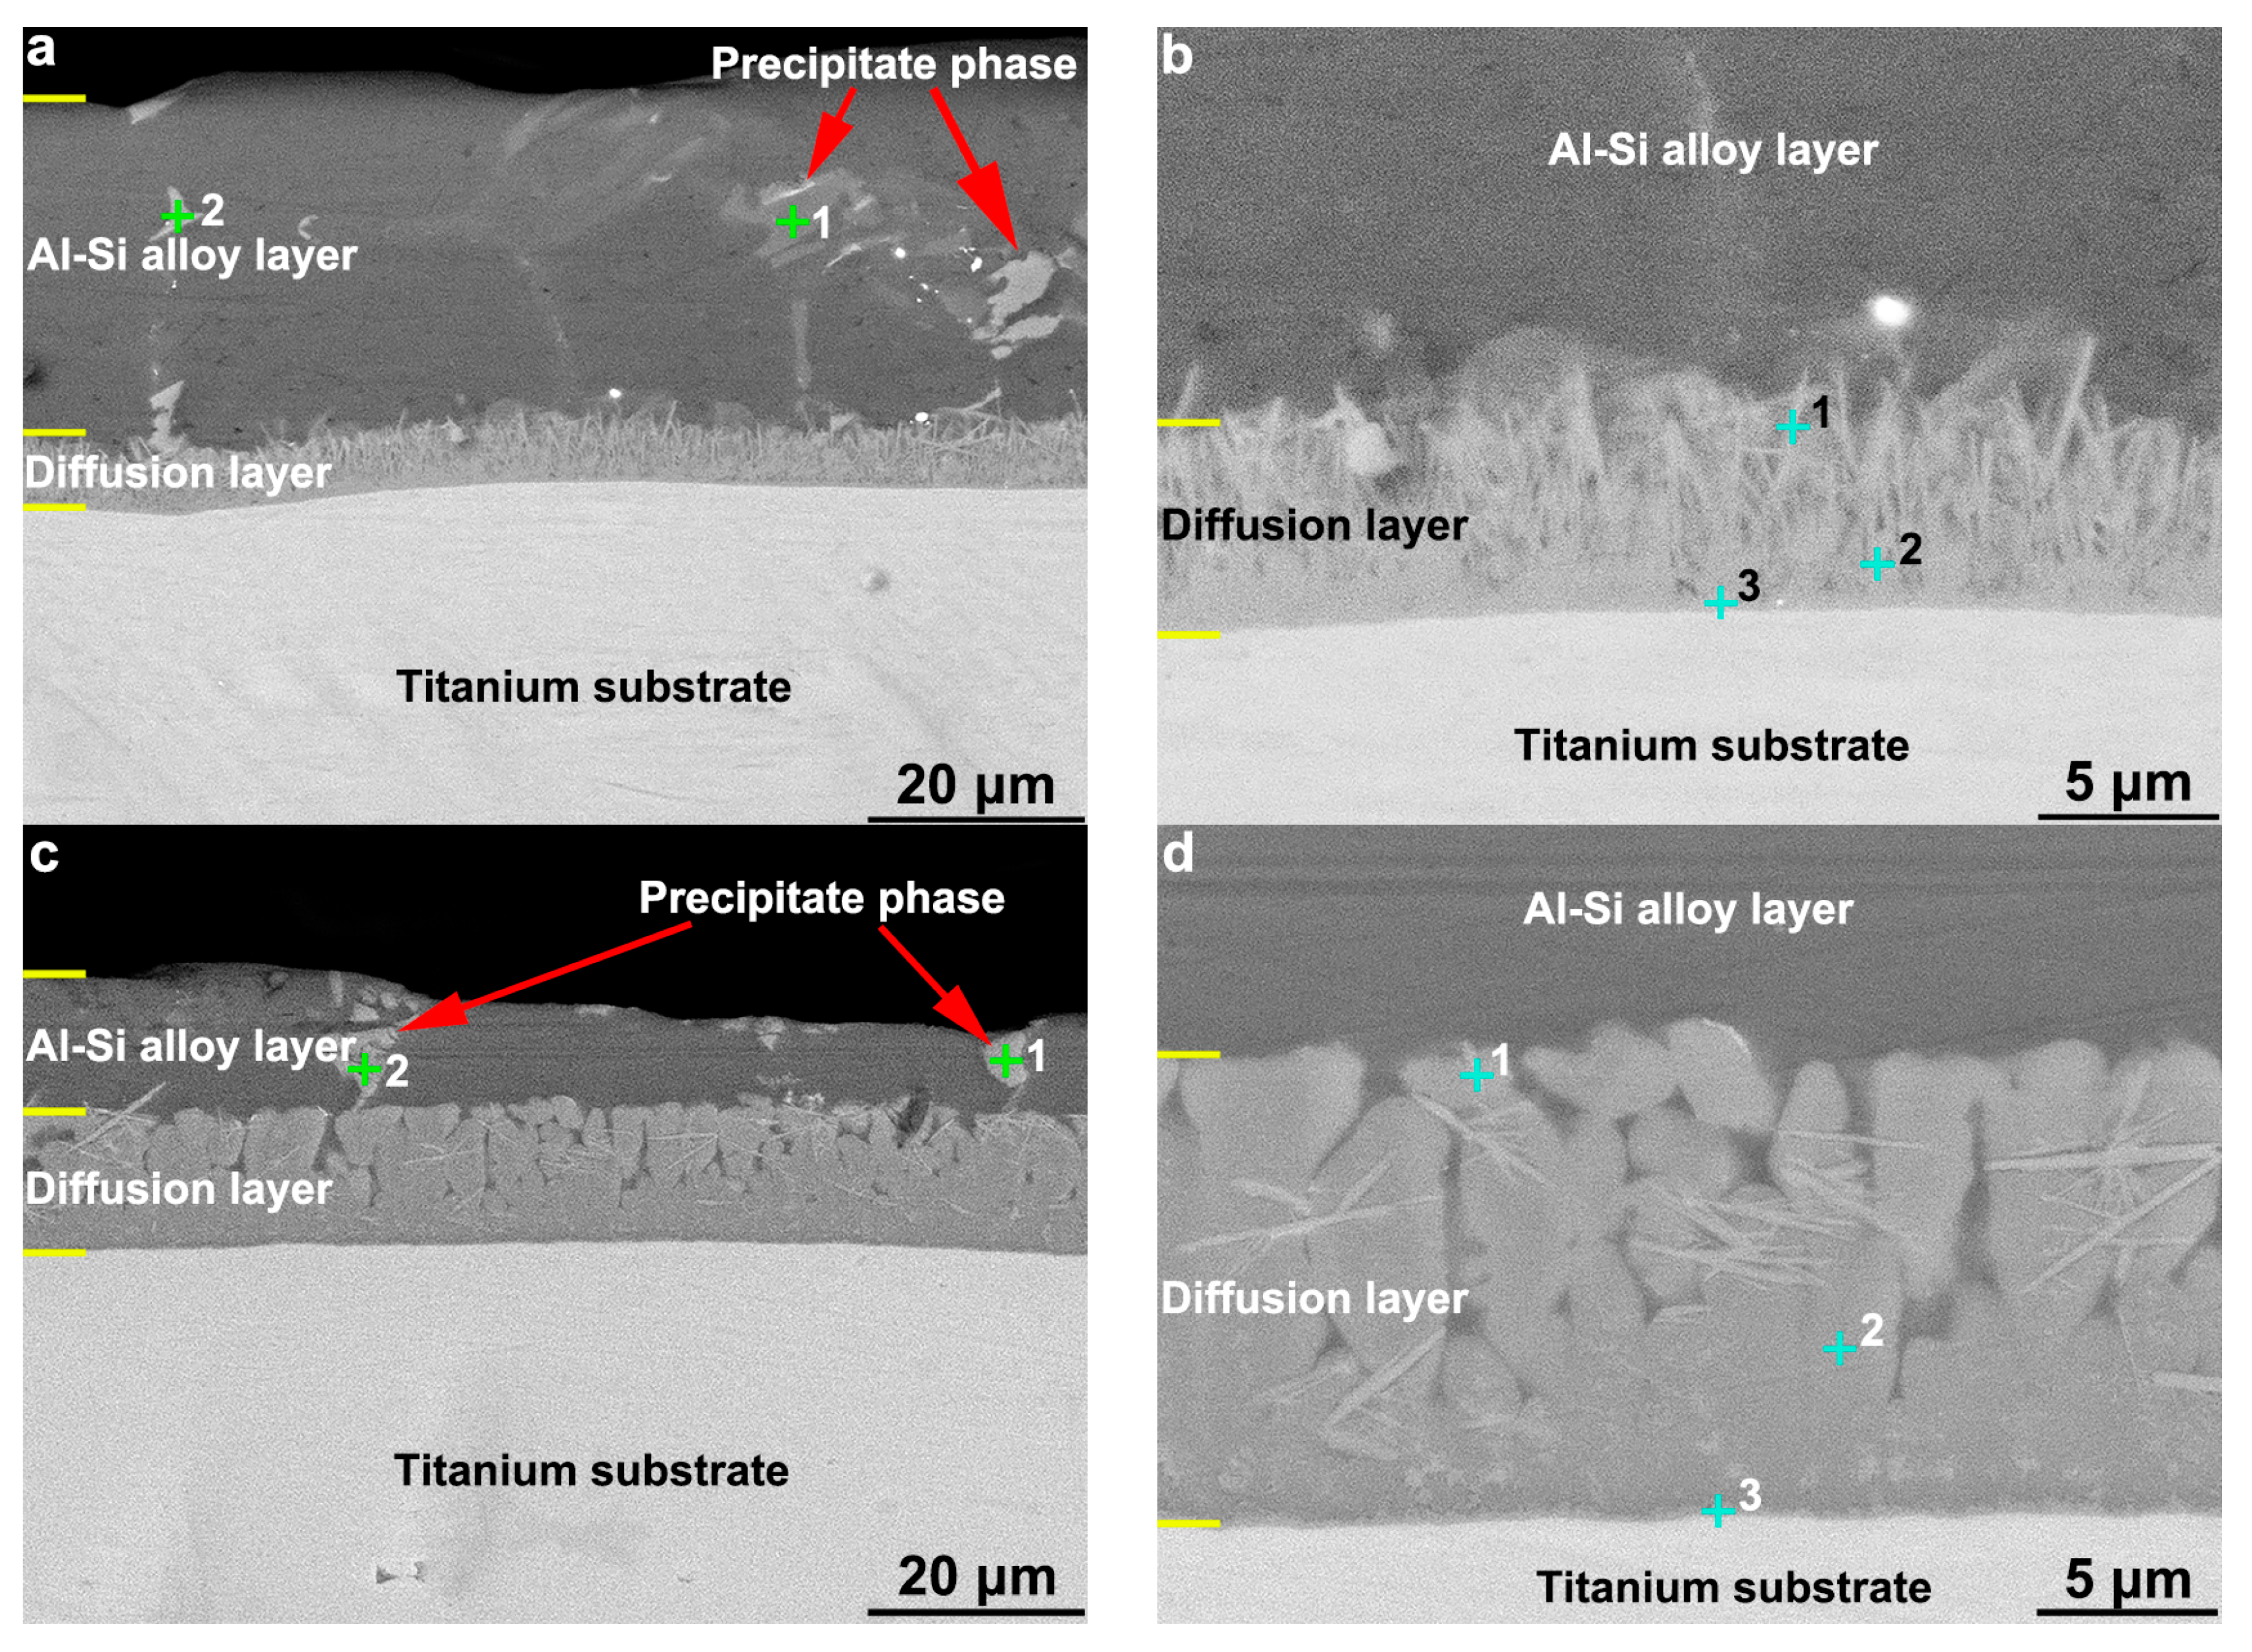 Coatings | Free Full-Text | Micrographic Properties of Composite Coatings  Prepared on TA2 Substrate by Hot-Dipping in Al–Si Alloy and Using Micro-Arc  Oxidation Technologies (MAO)